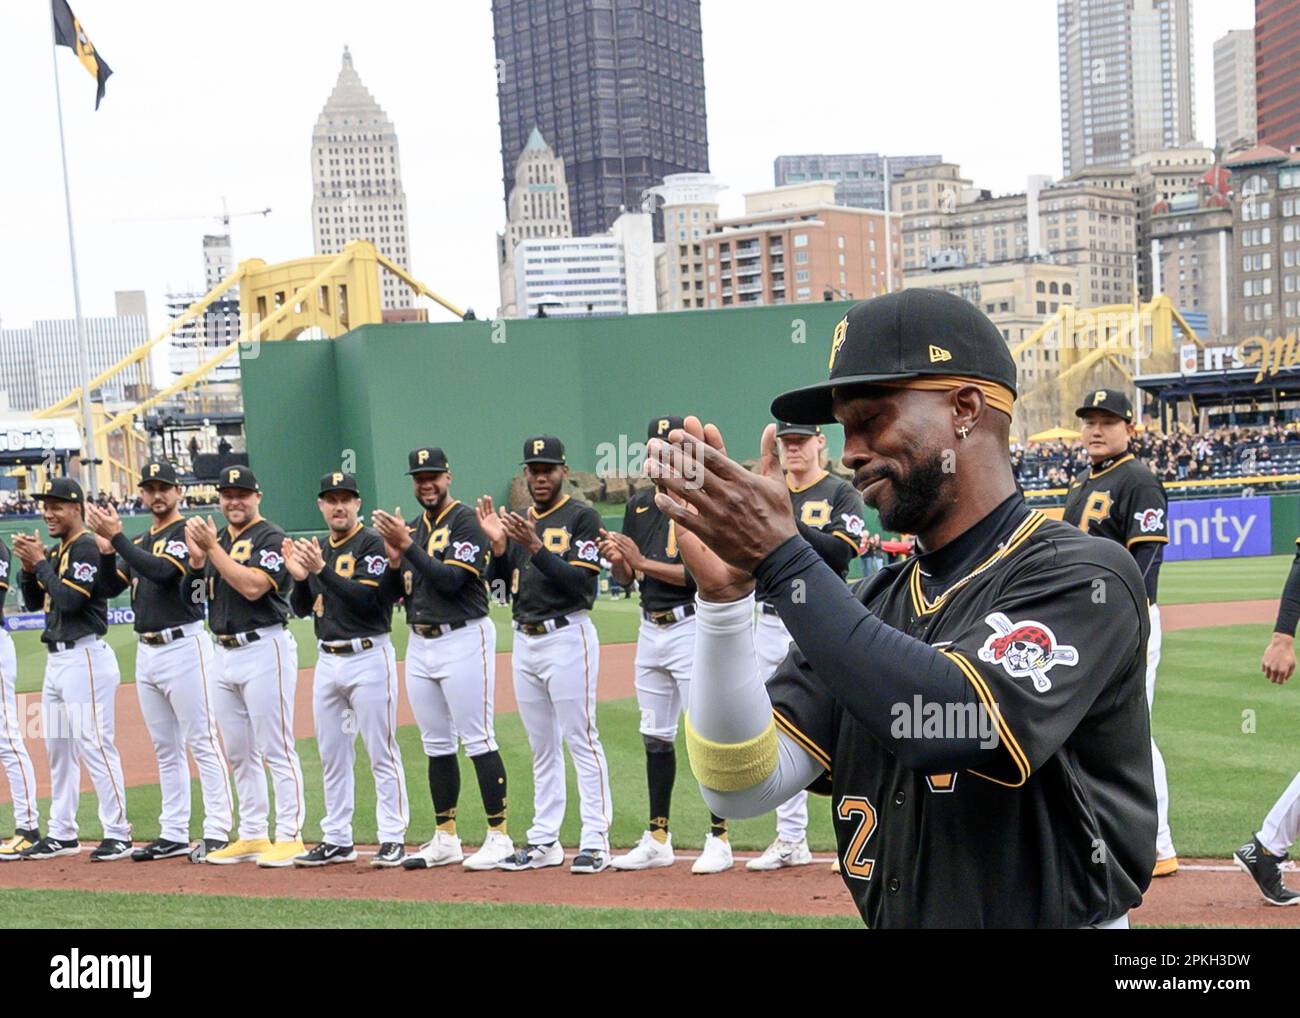 Pittsburgh Pirates home opener vs. Chicago White Sox at PNC Park